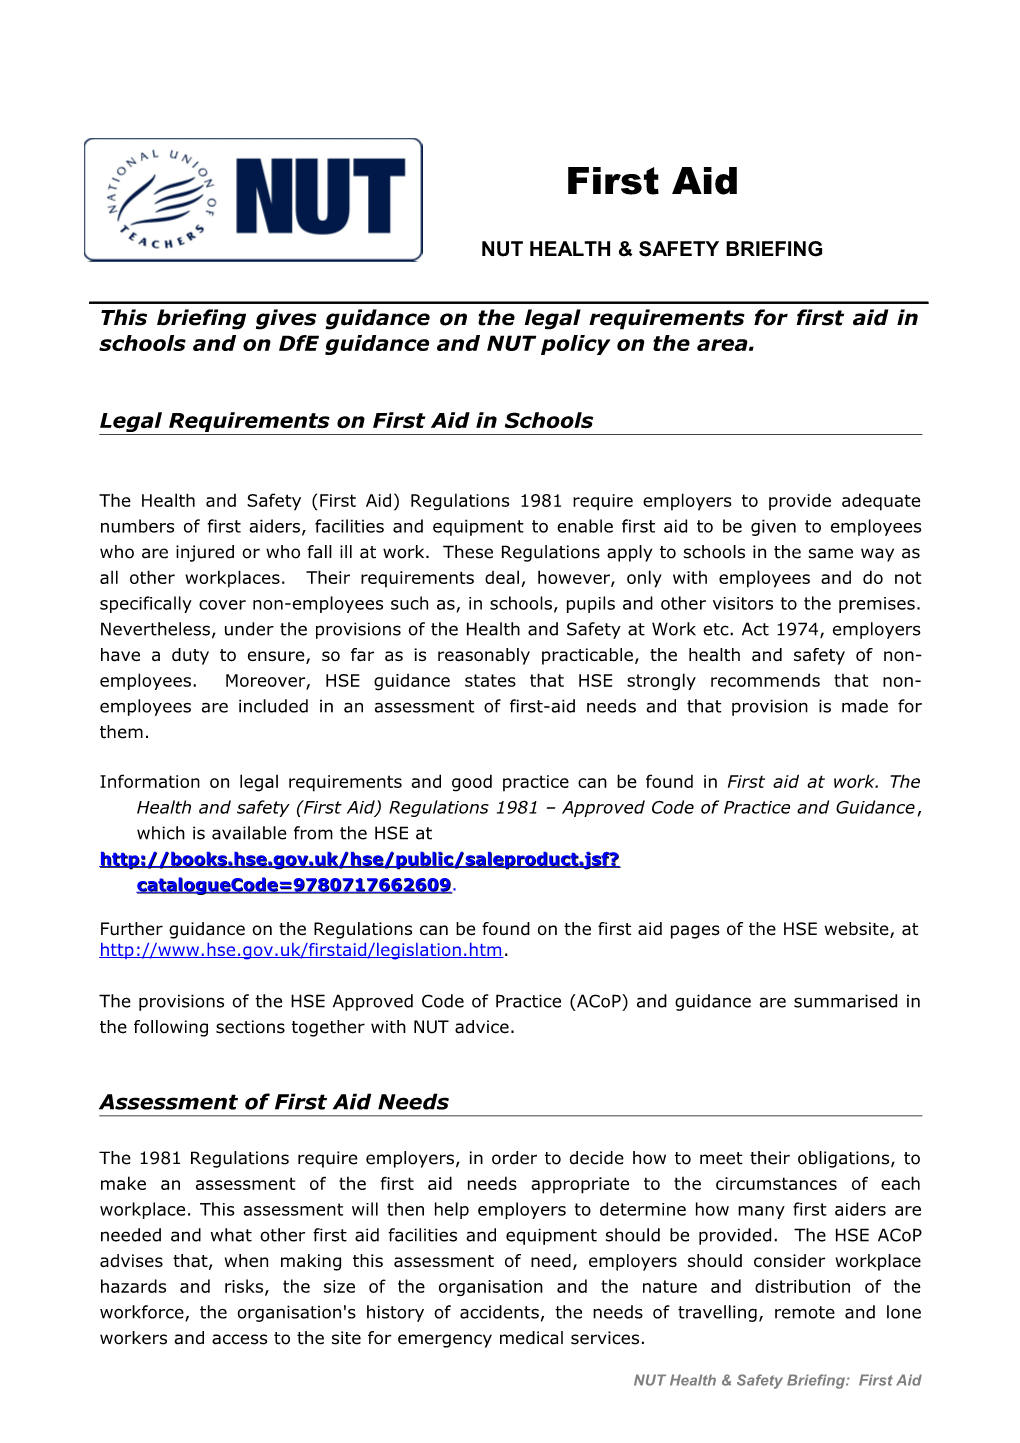 Legal Requirements on First Aid in Schools